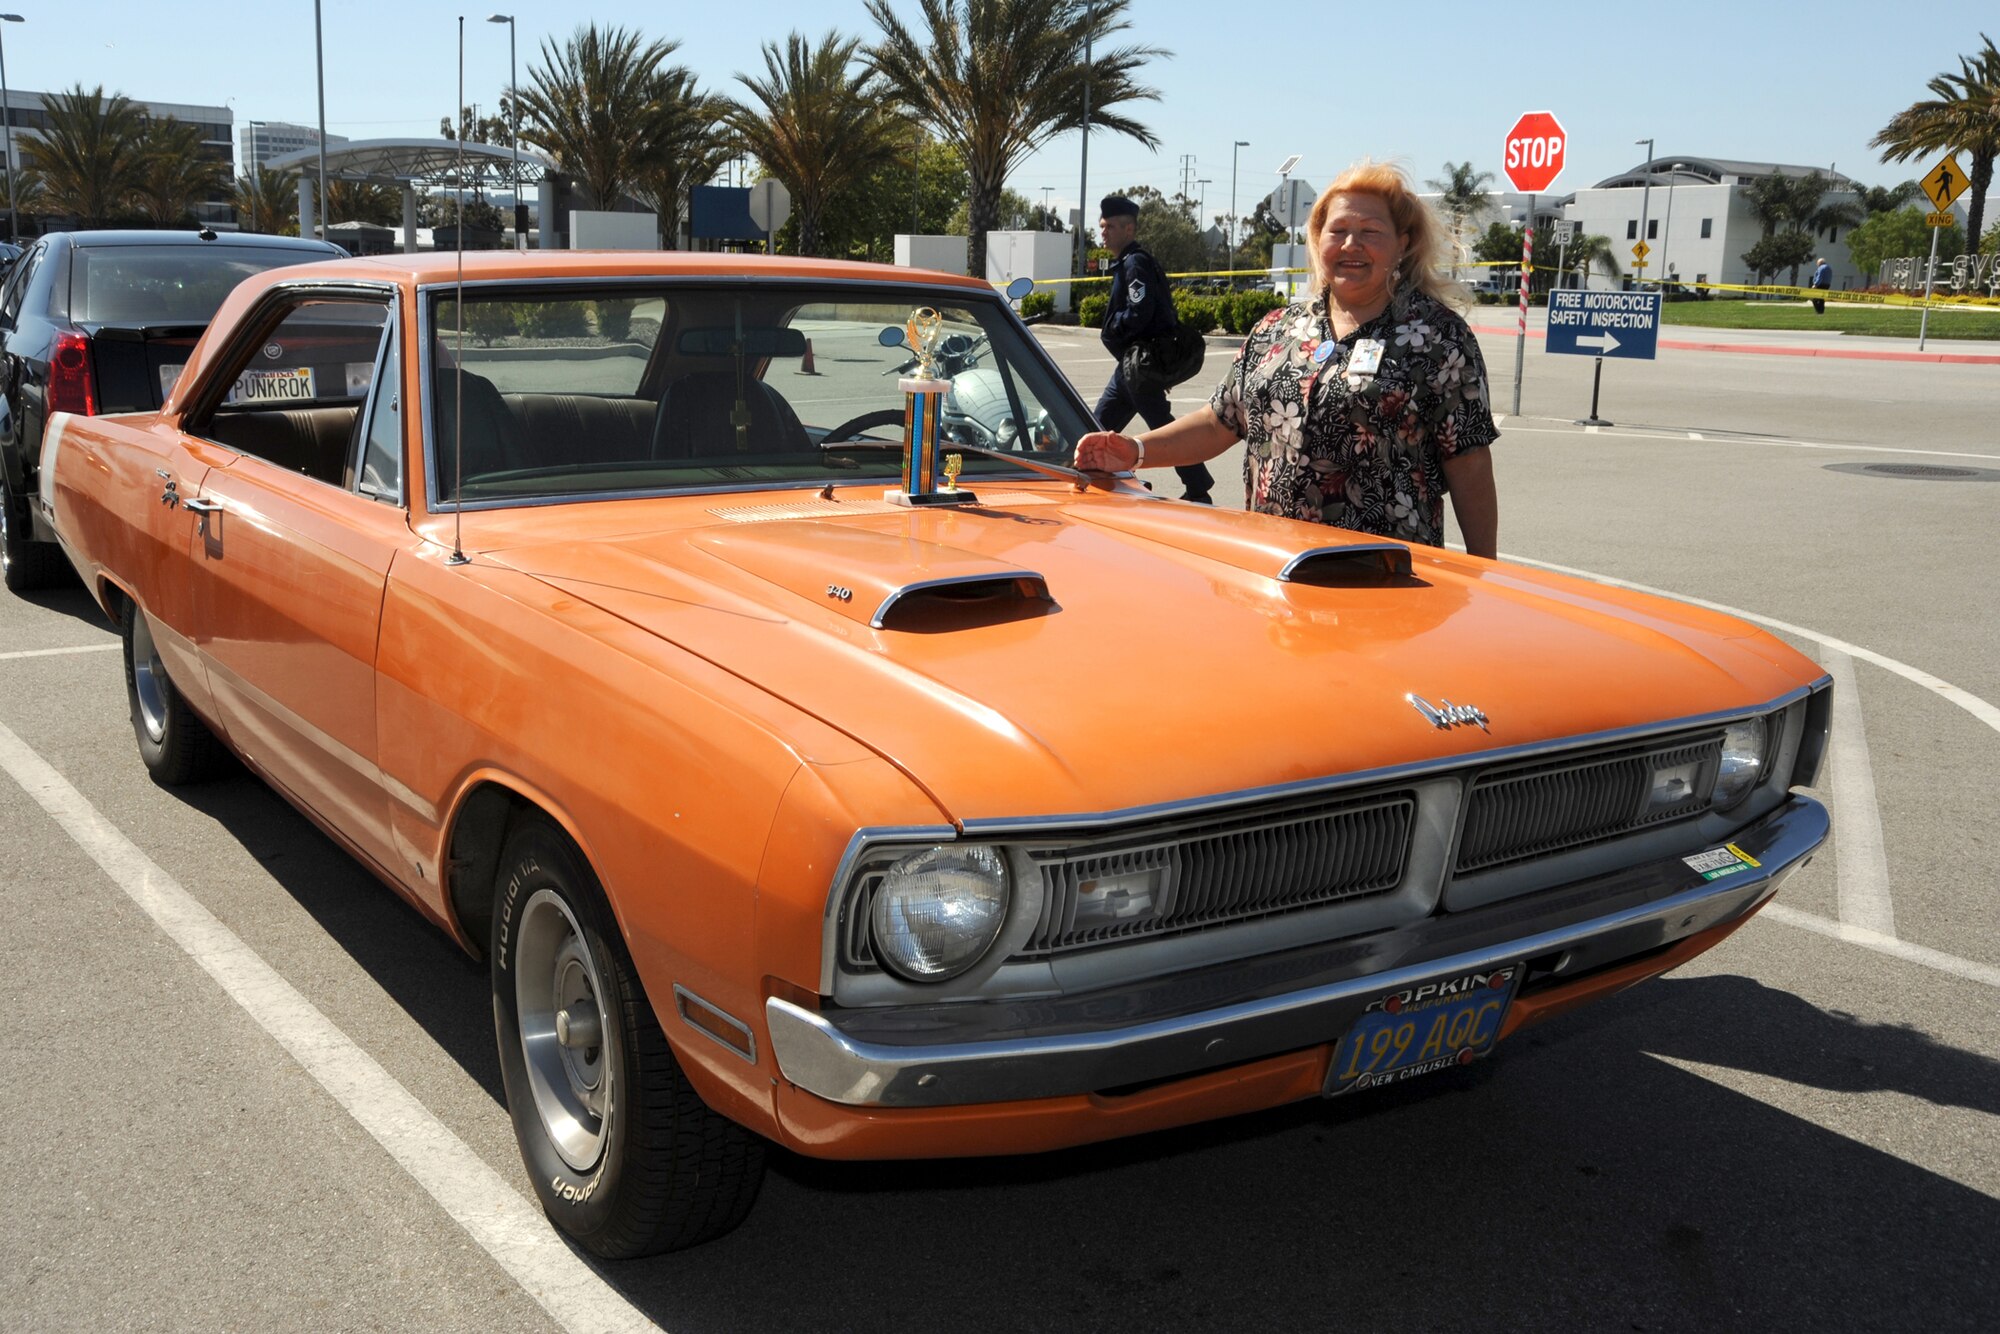 Carol Hill, Space and Missile Systems Center, won in the People’s Choice category with her classic Dodge Dart. (Photo by Joe Juarez)